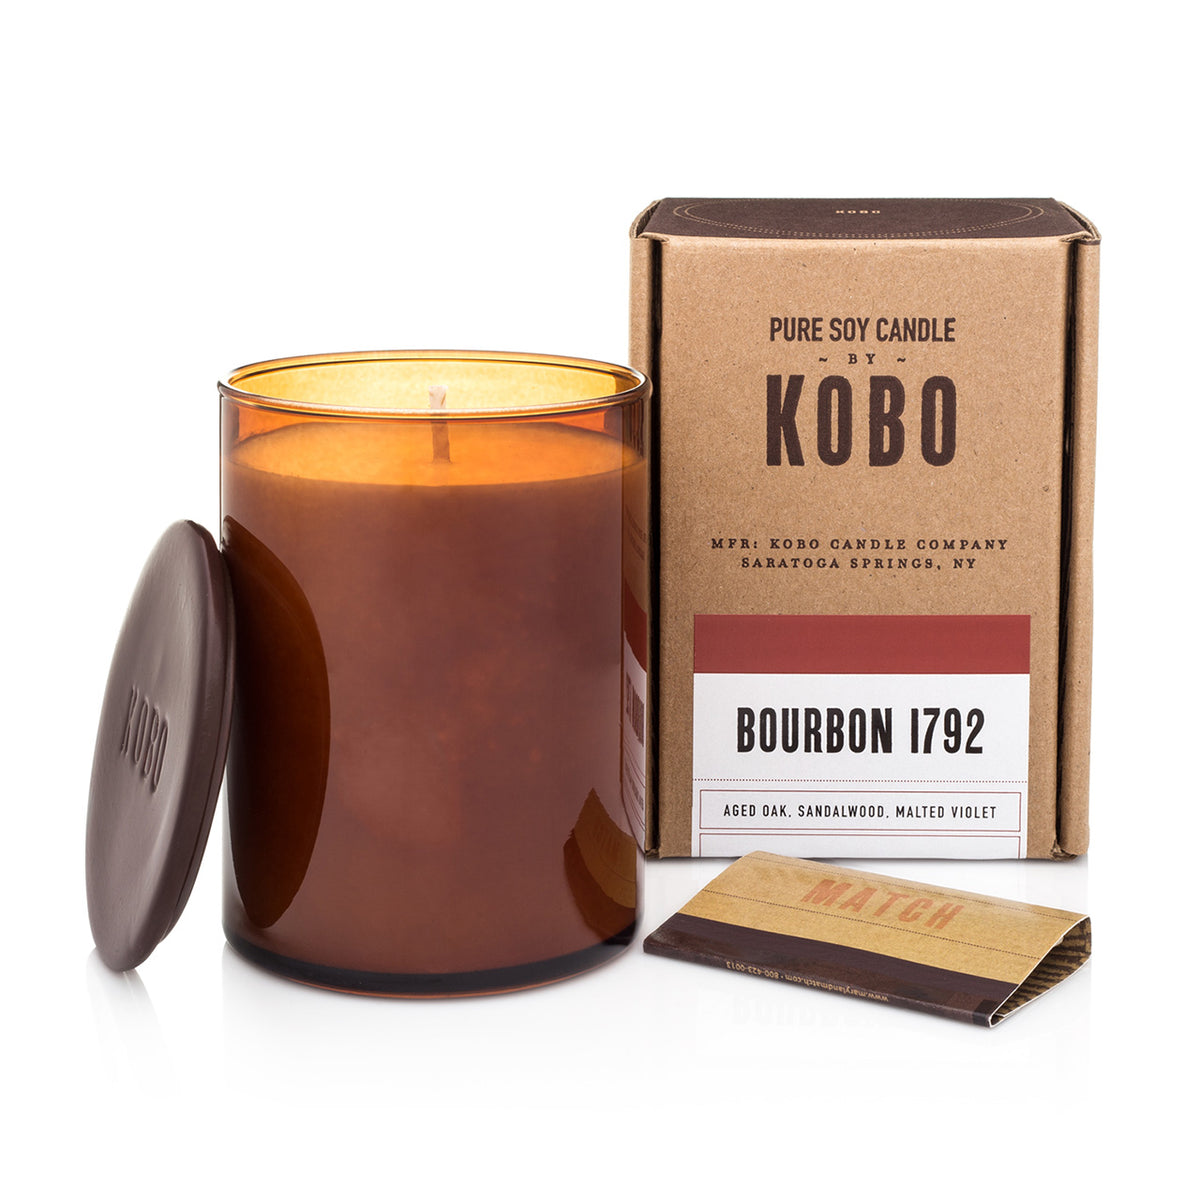 Kobo Large Pure Soy Candle in an amber glass jar with ceramic lid, matches and kraft box. Bourbon 1792 scent